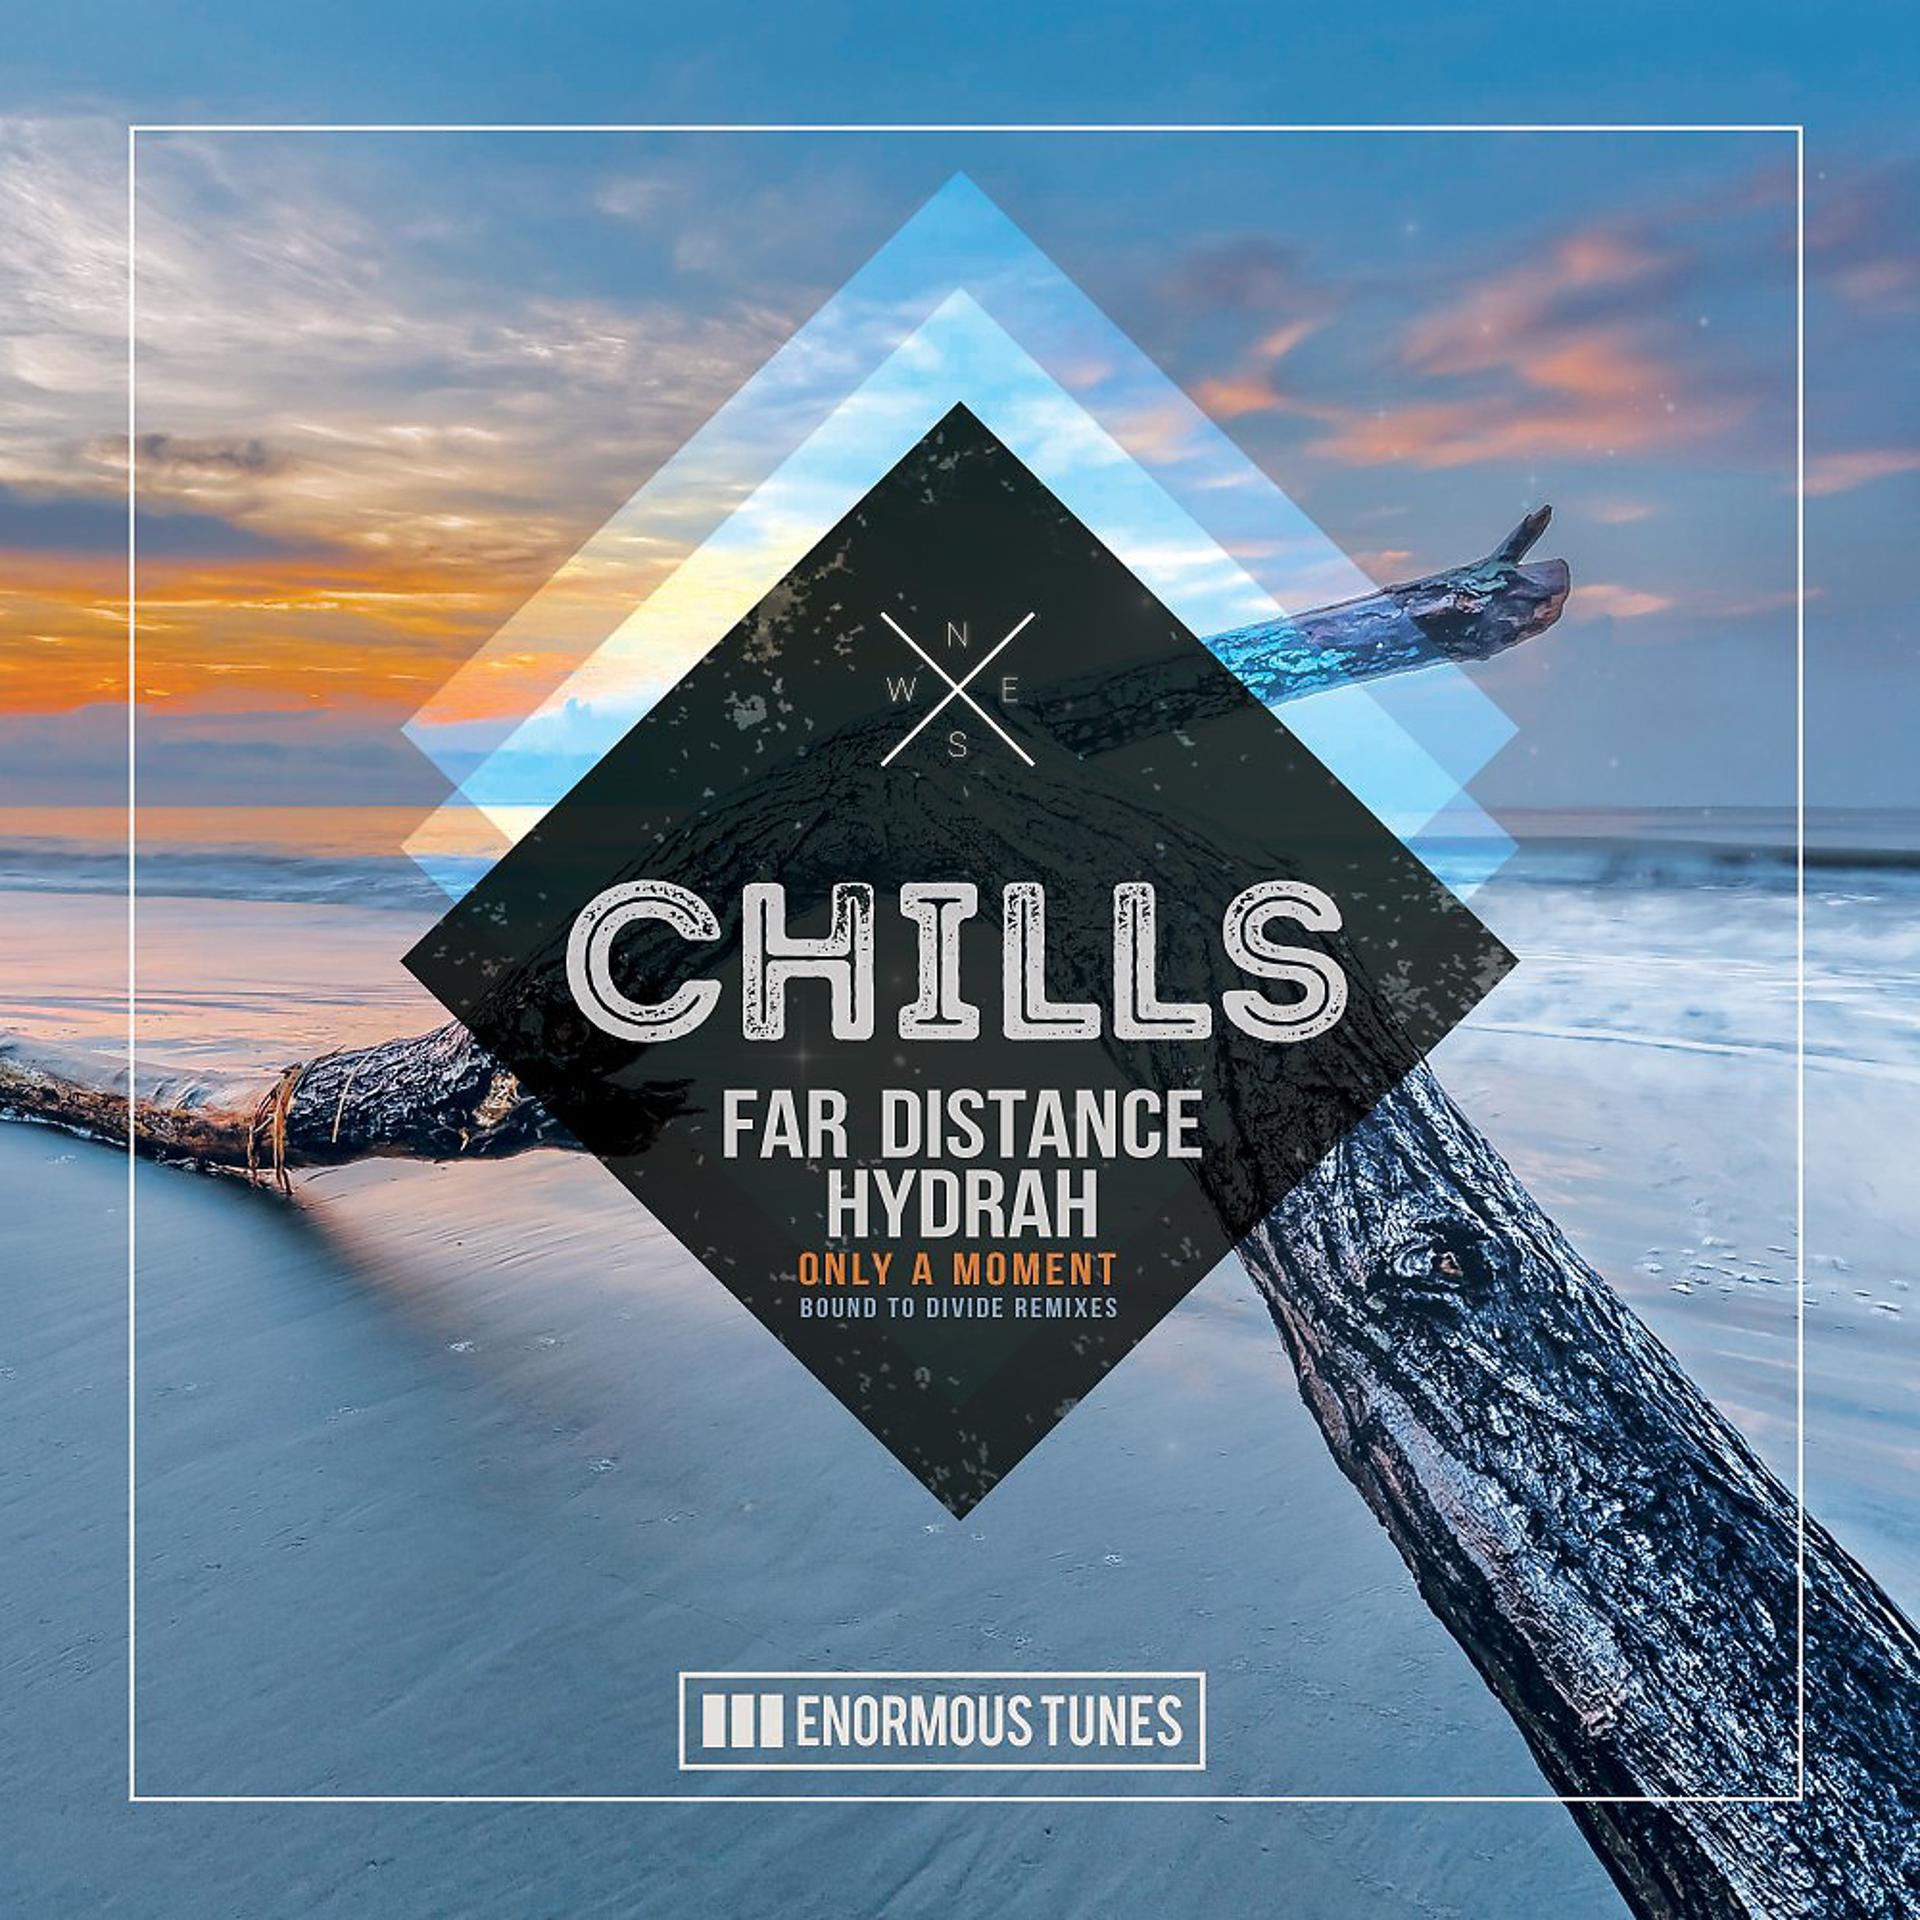 The further distance. Far distance, Hydrah - only a moment. Bound to Divide - Mirage (Extended Mix). Far distance, bound to Divide - Mirage (far distance Remix). Silent progress - after you.